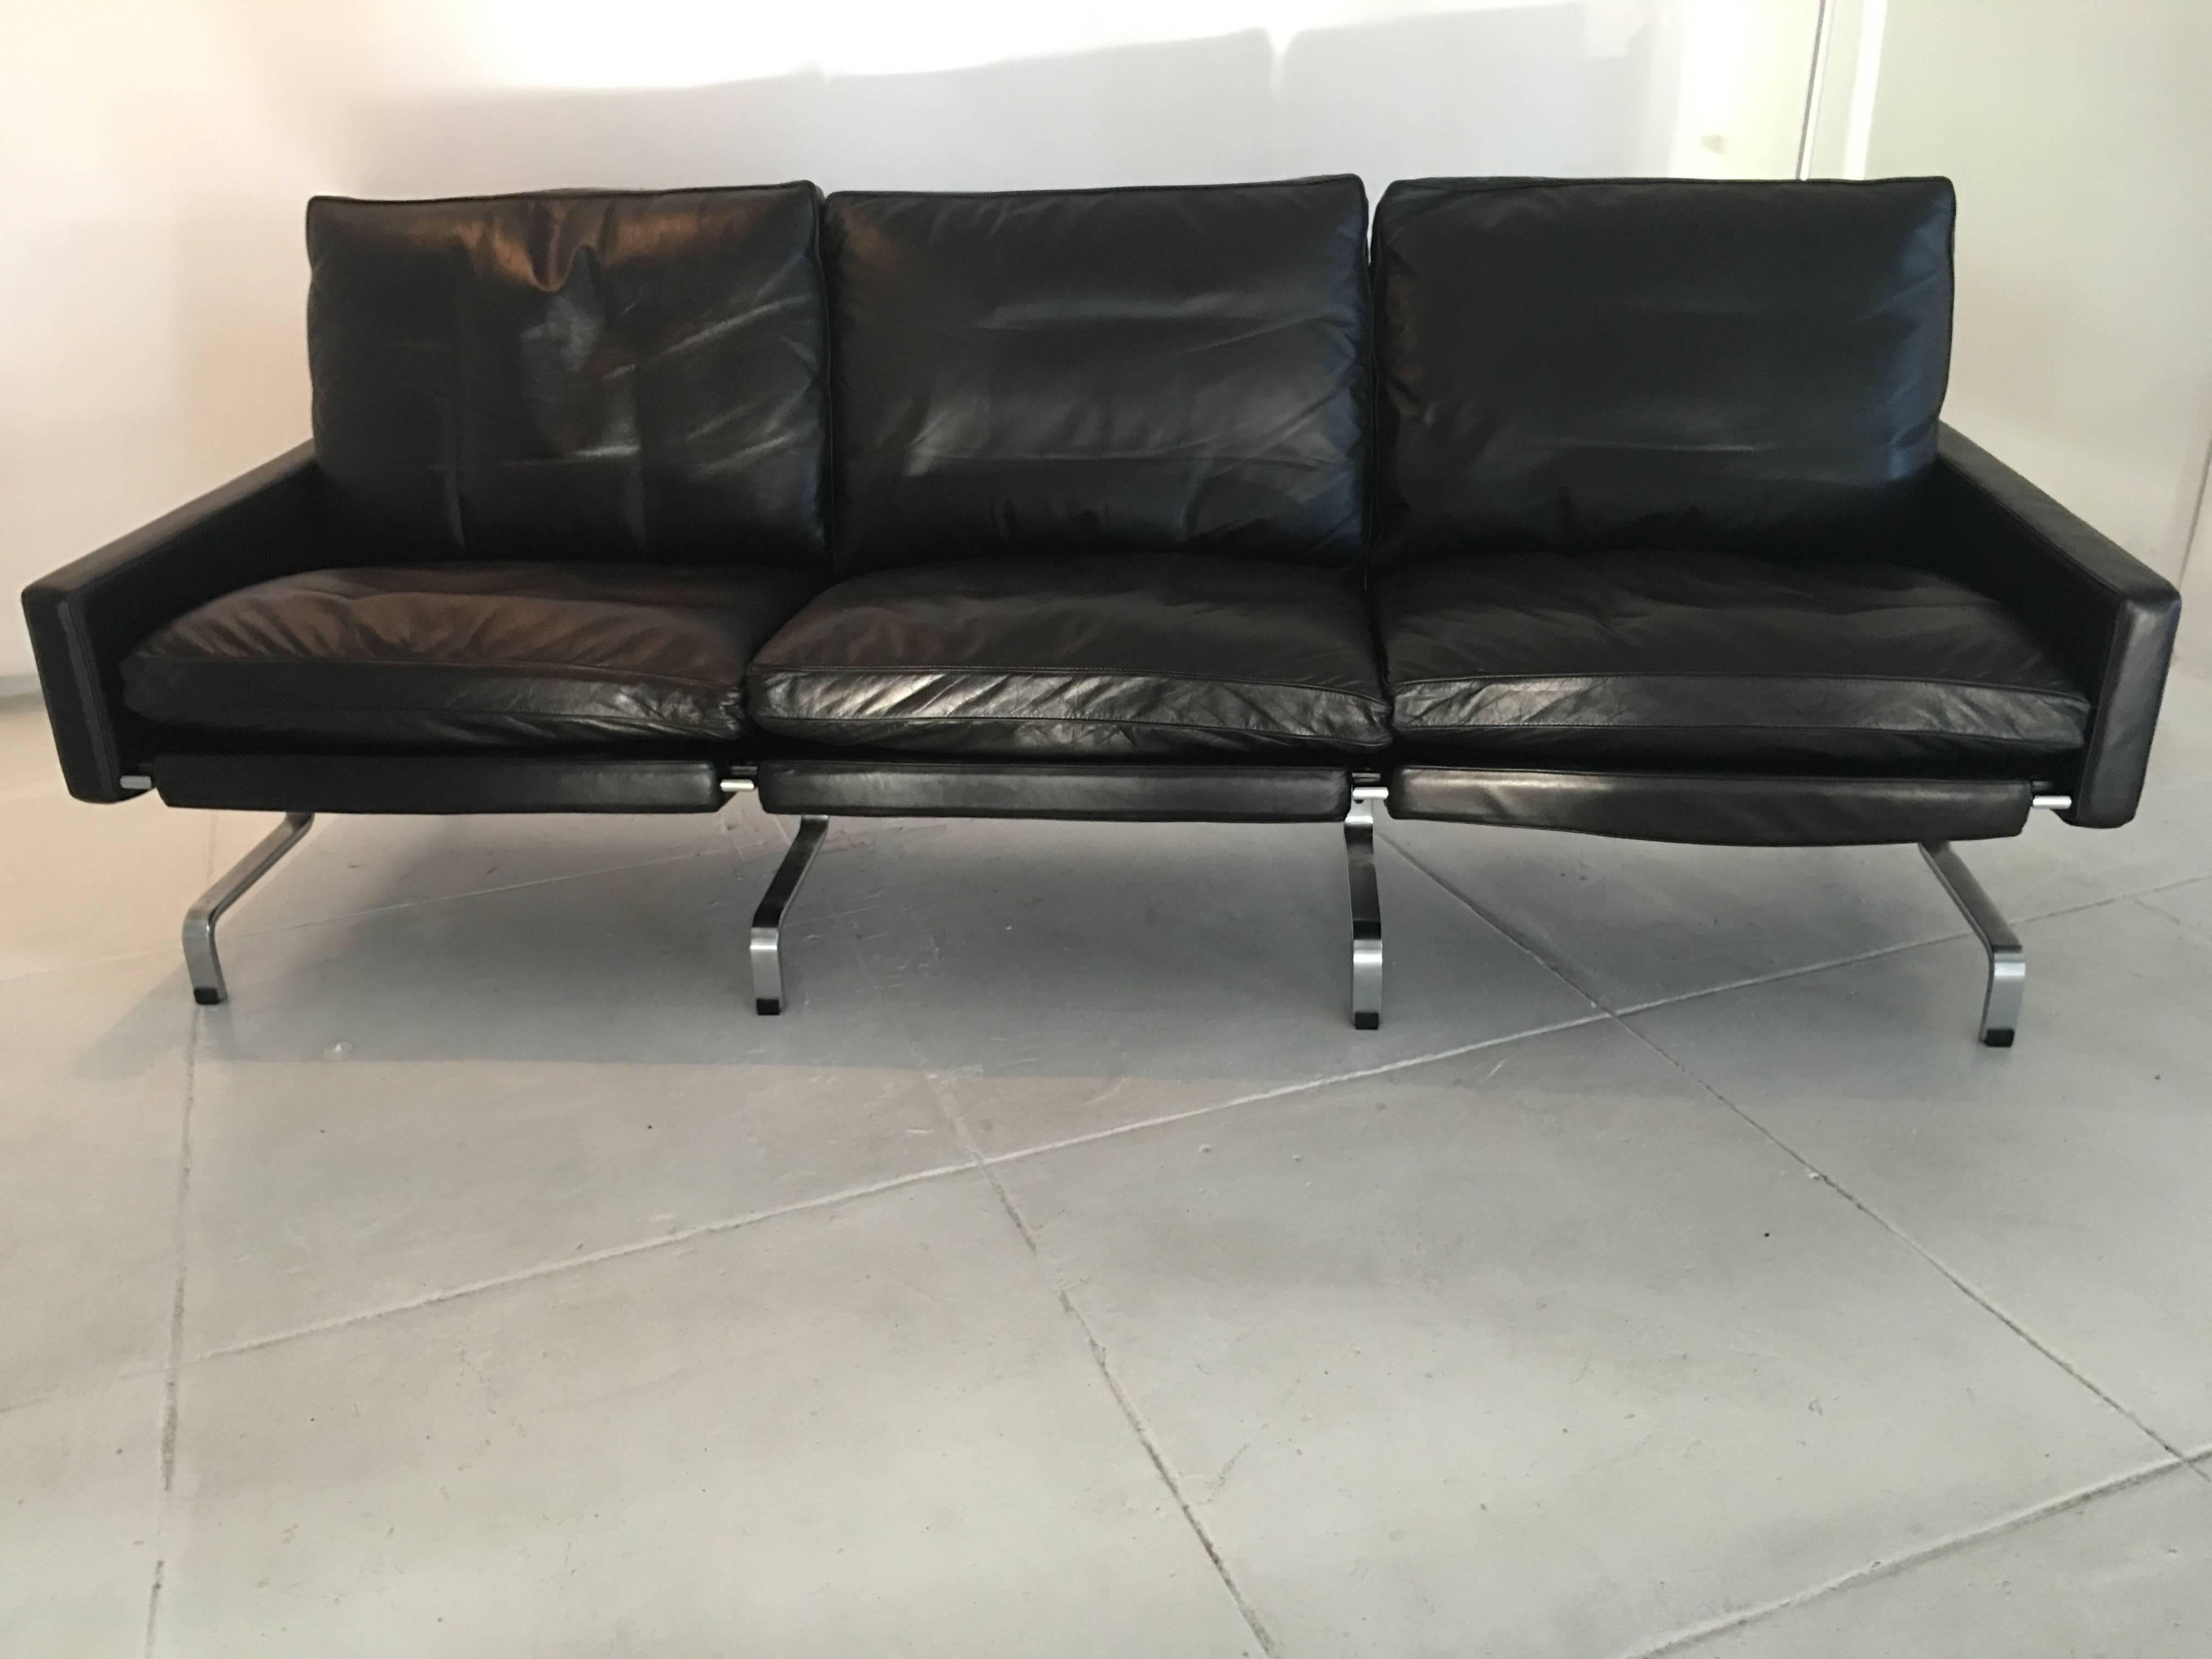 Most amazing and incredible PK31/3 three-seat sofa by Poul Kjaerholm for E, Kold Christensen, 1969. Black leather and chrome-plated steel, excellent condition.